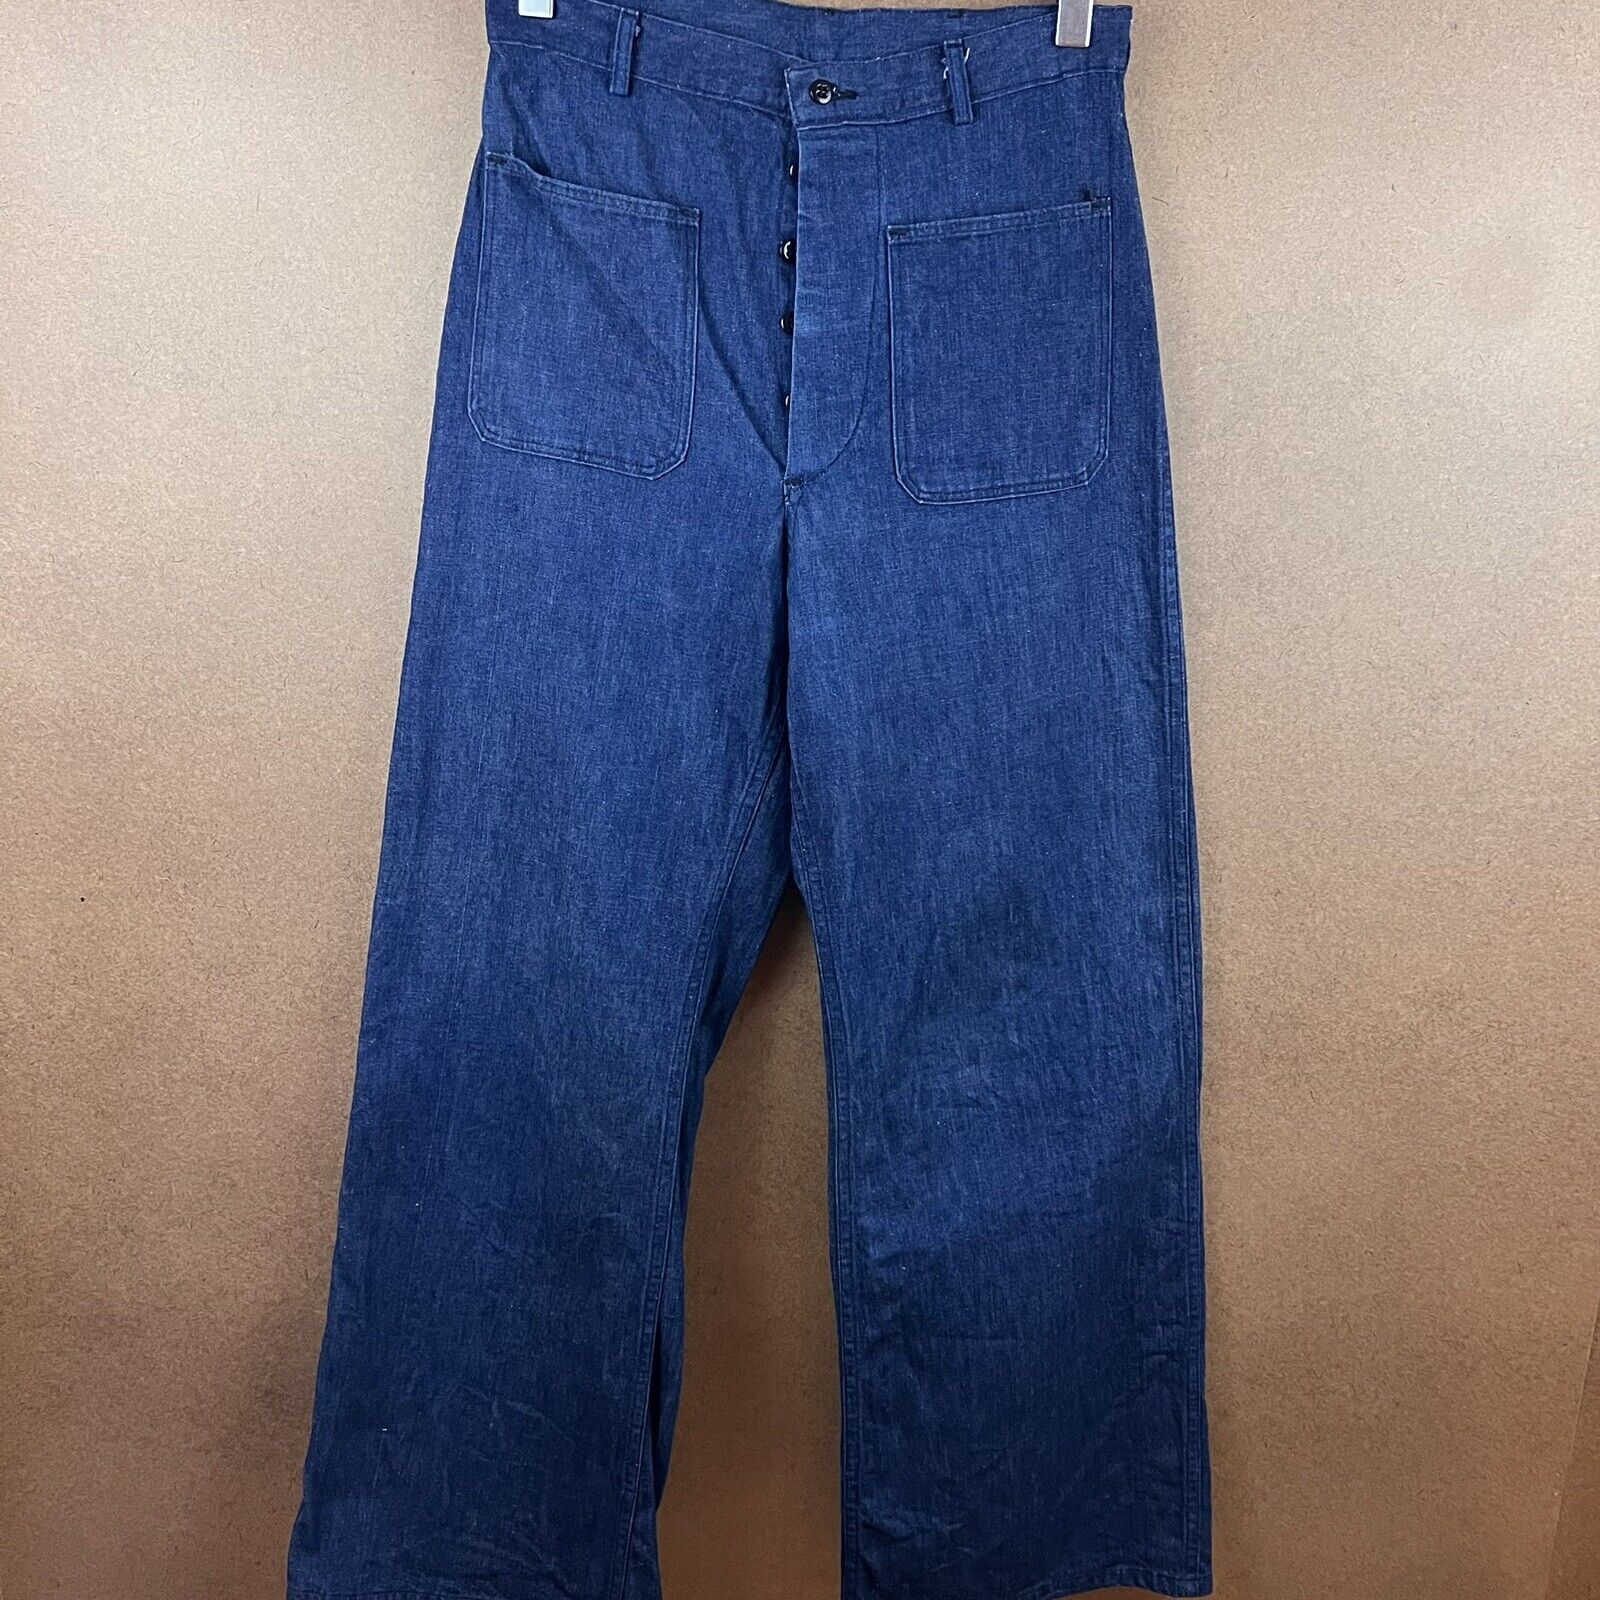 VTG 60s US Navy Denim Dungarees Flared Trousers 30x31